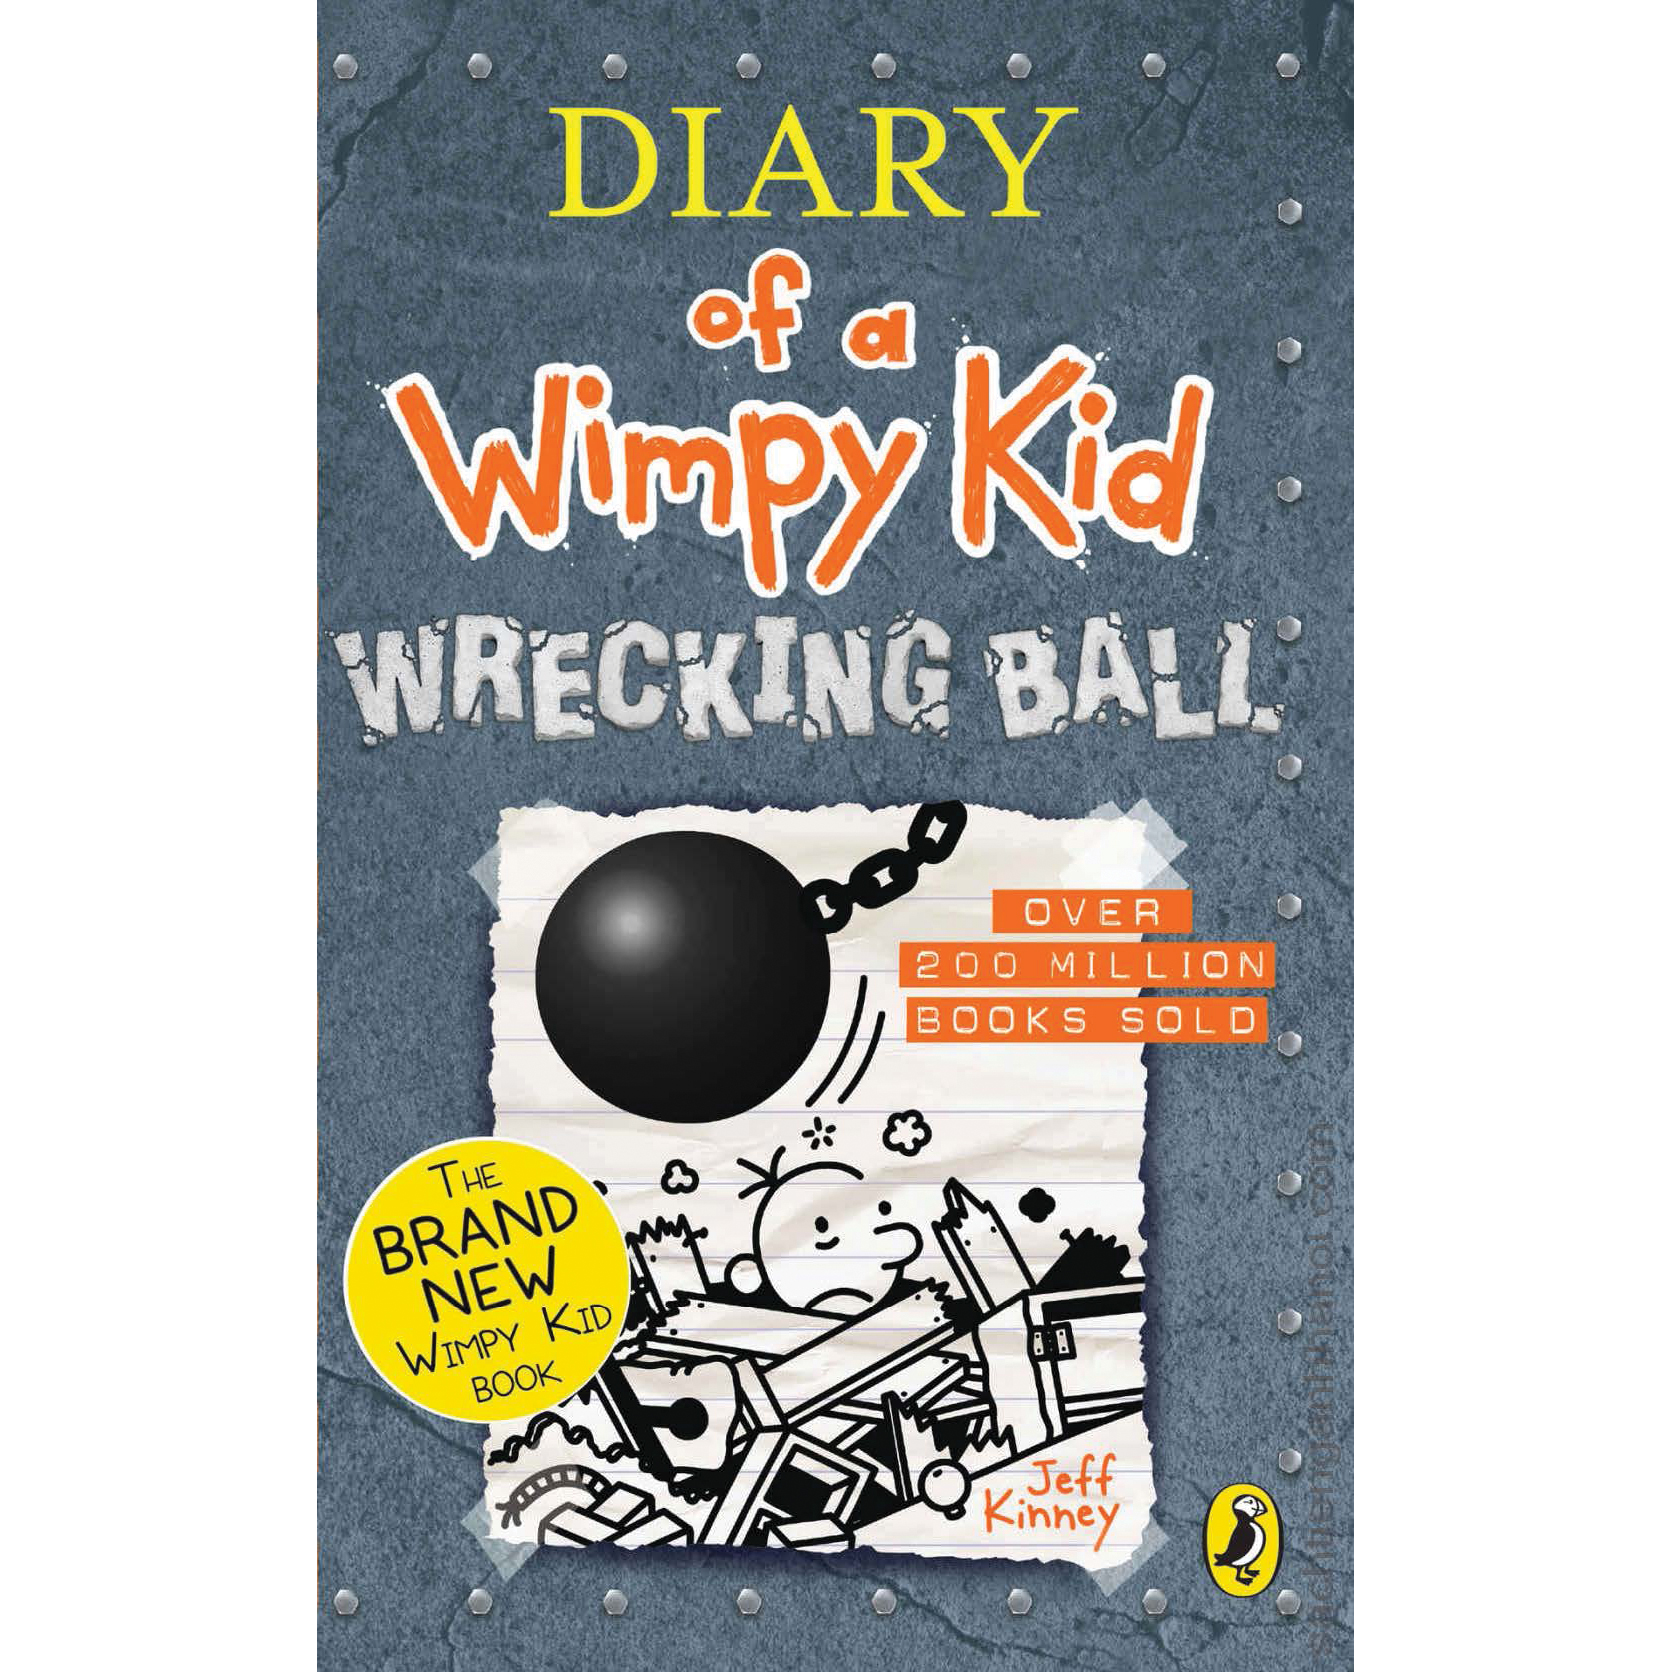 Diary of a Wimpy Kid 14: Wrecking Ball (Hardback)